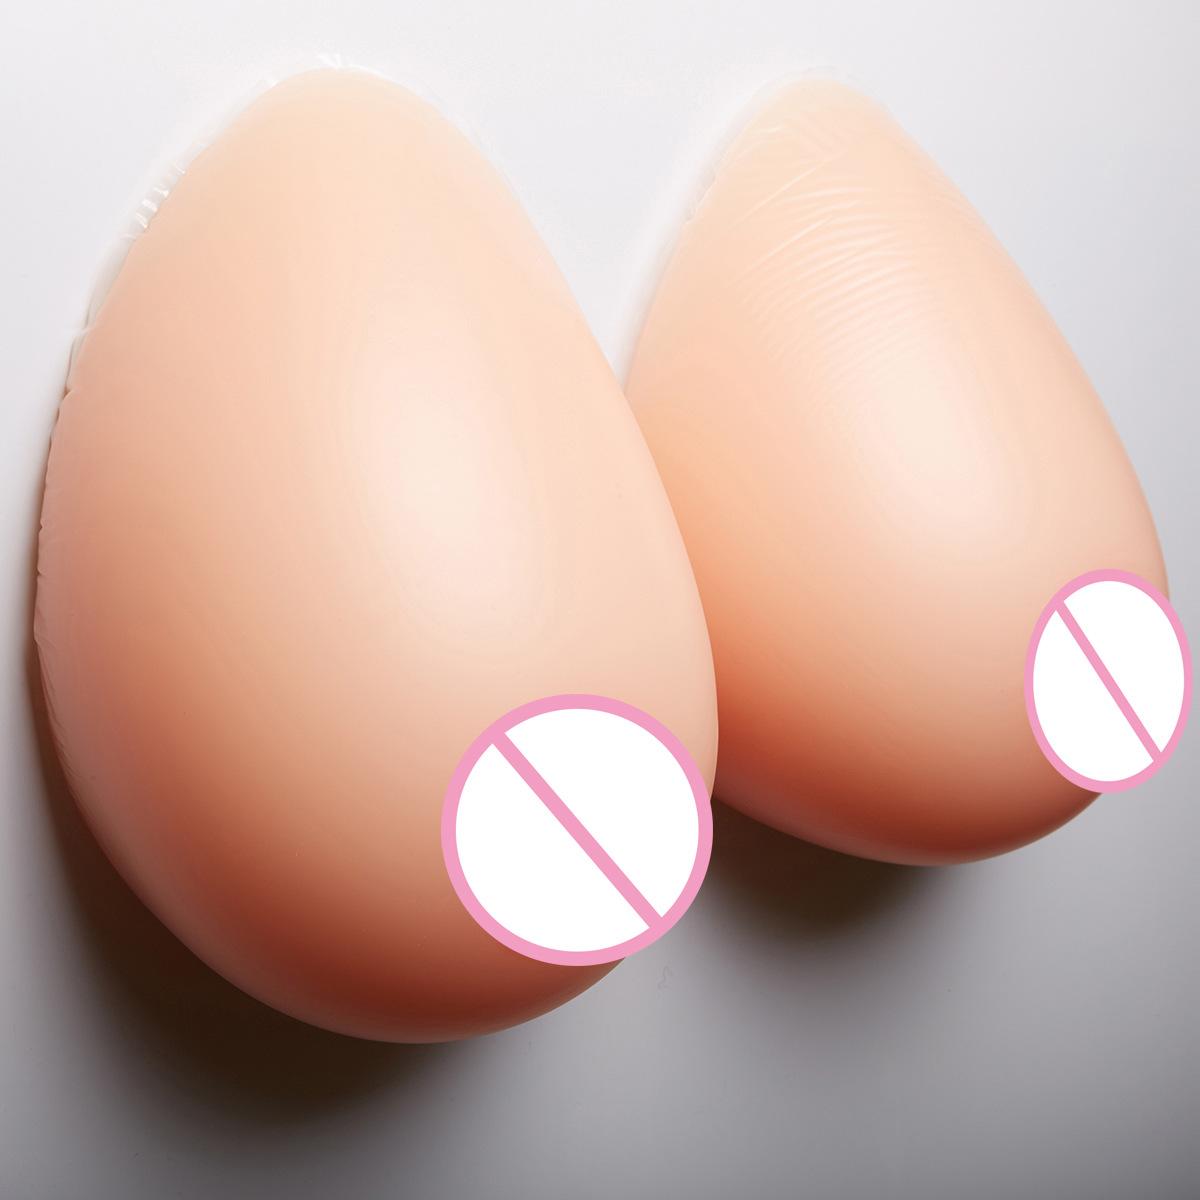 Adultos Stroker Seks Toys Boobs Prosthetic Silicone Breast Customized Premium Breast Forms Jouets Pour Adultes